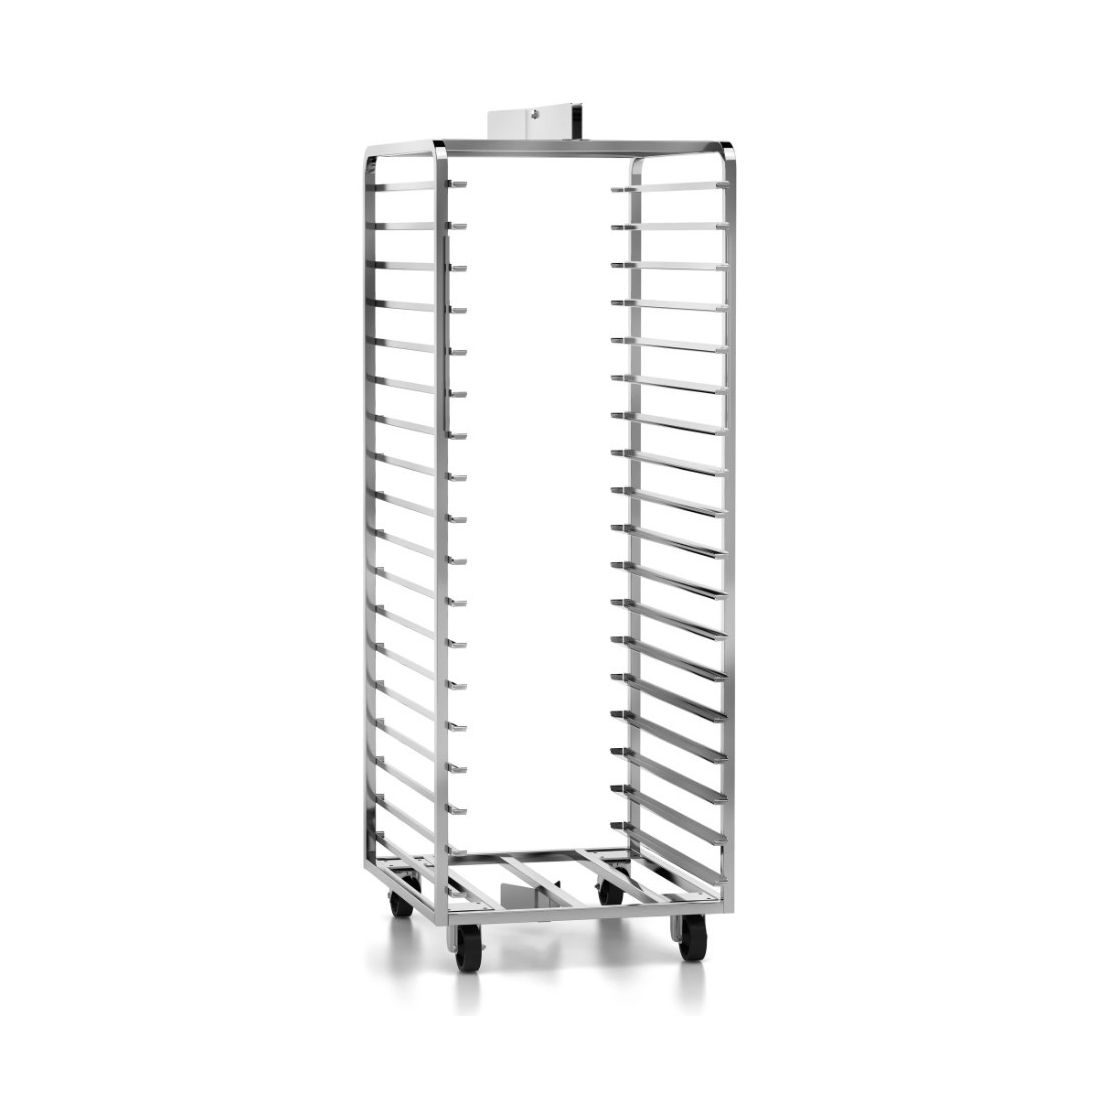 REAL FORNI Stainless steel rotary trolley 18 shelves|mkayn|مكاين